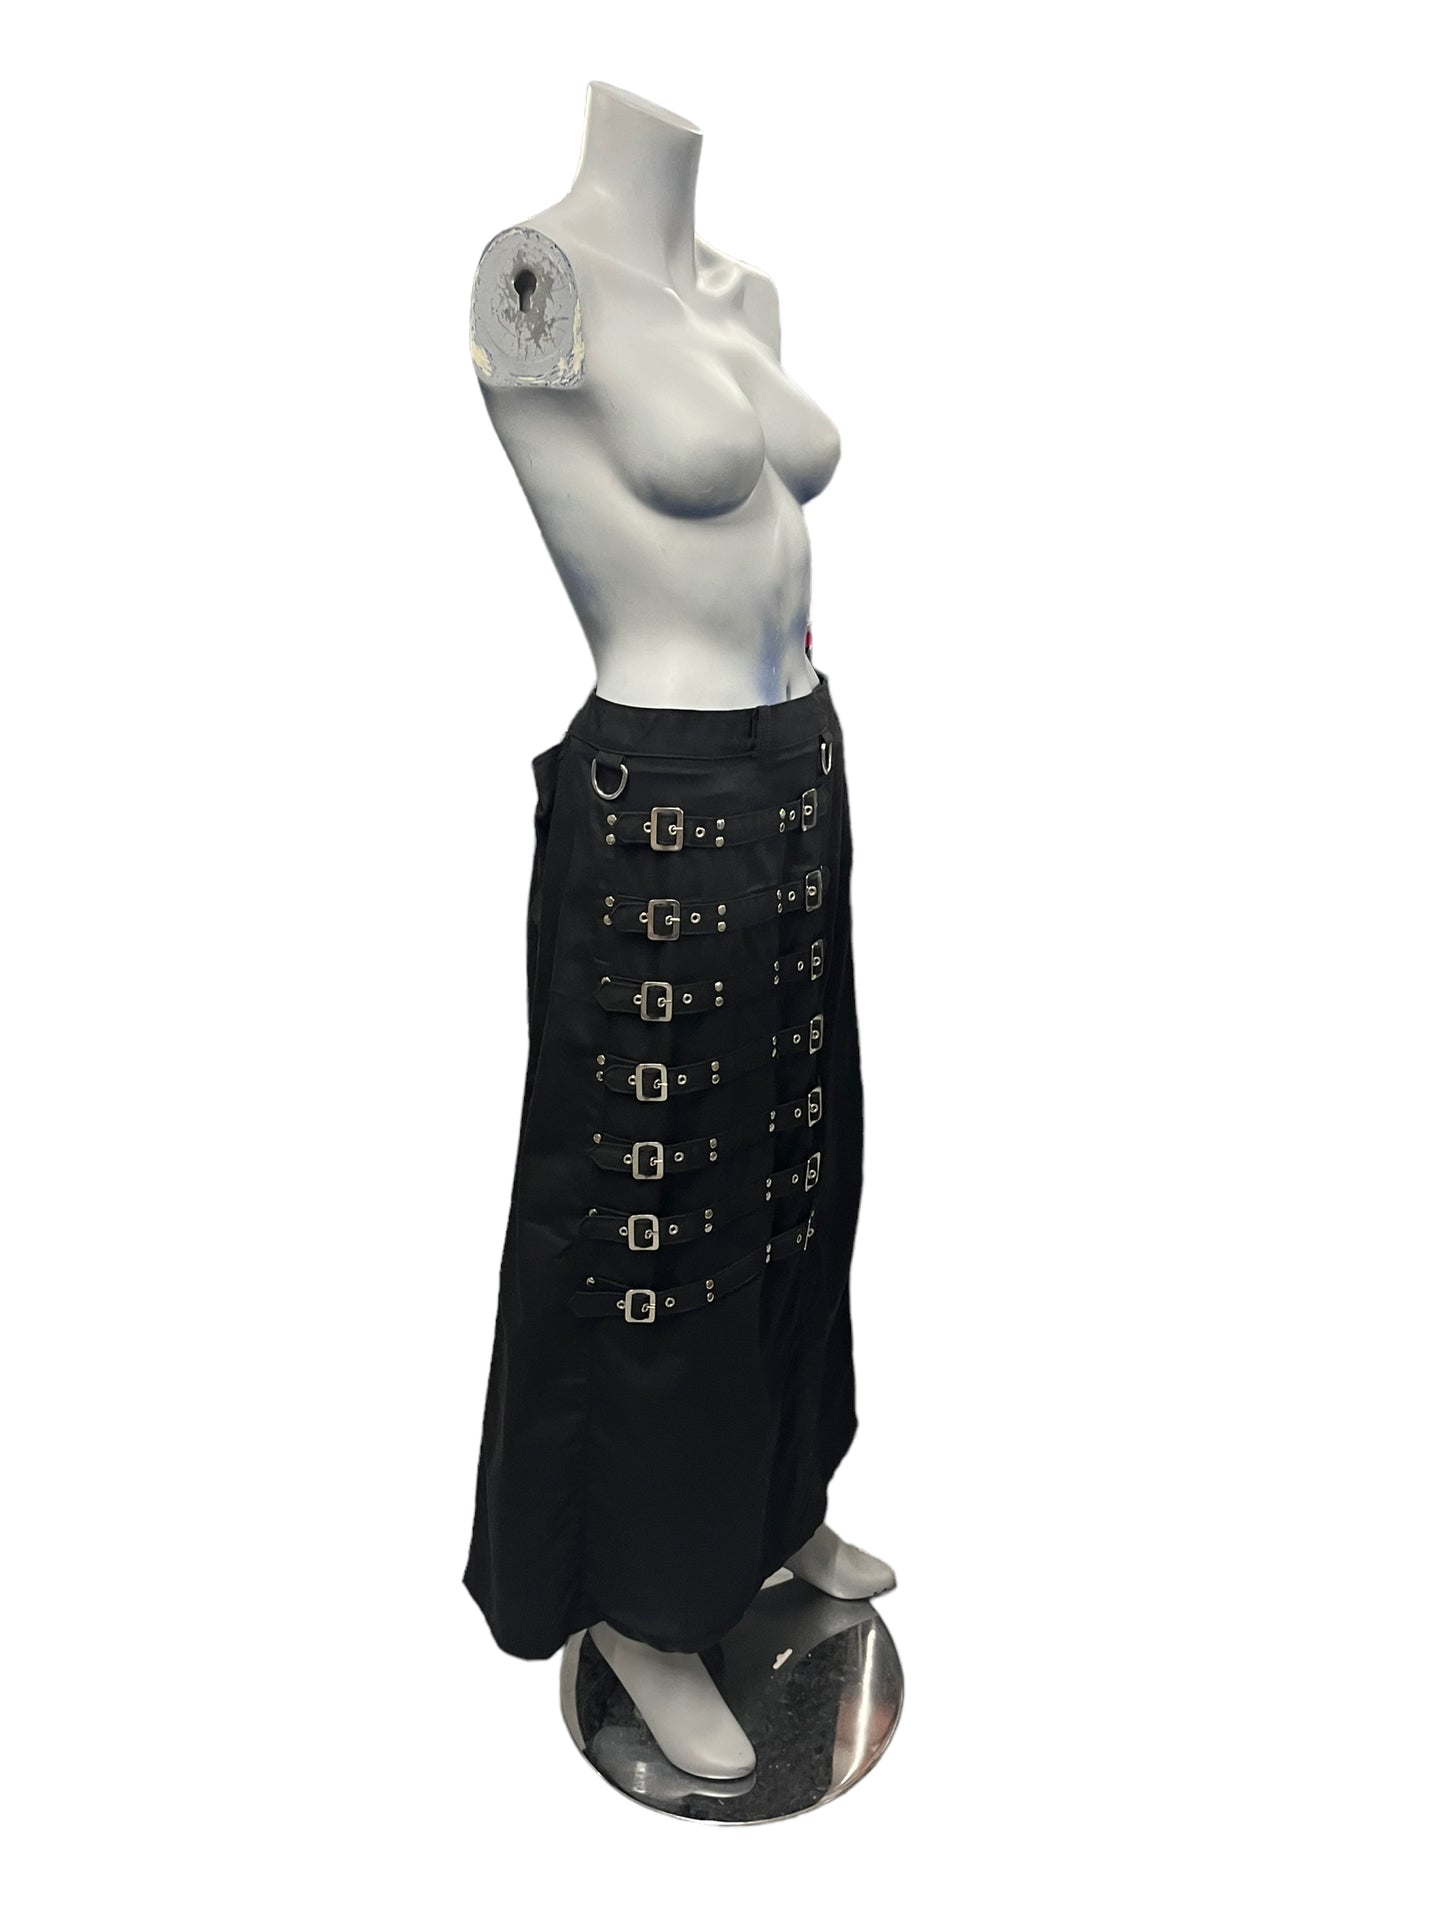 Fashion World - LL15 - Long Black Skirt with Buckle - Size S